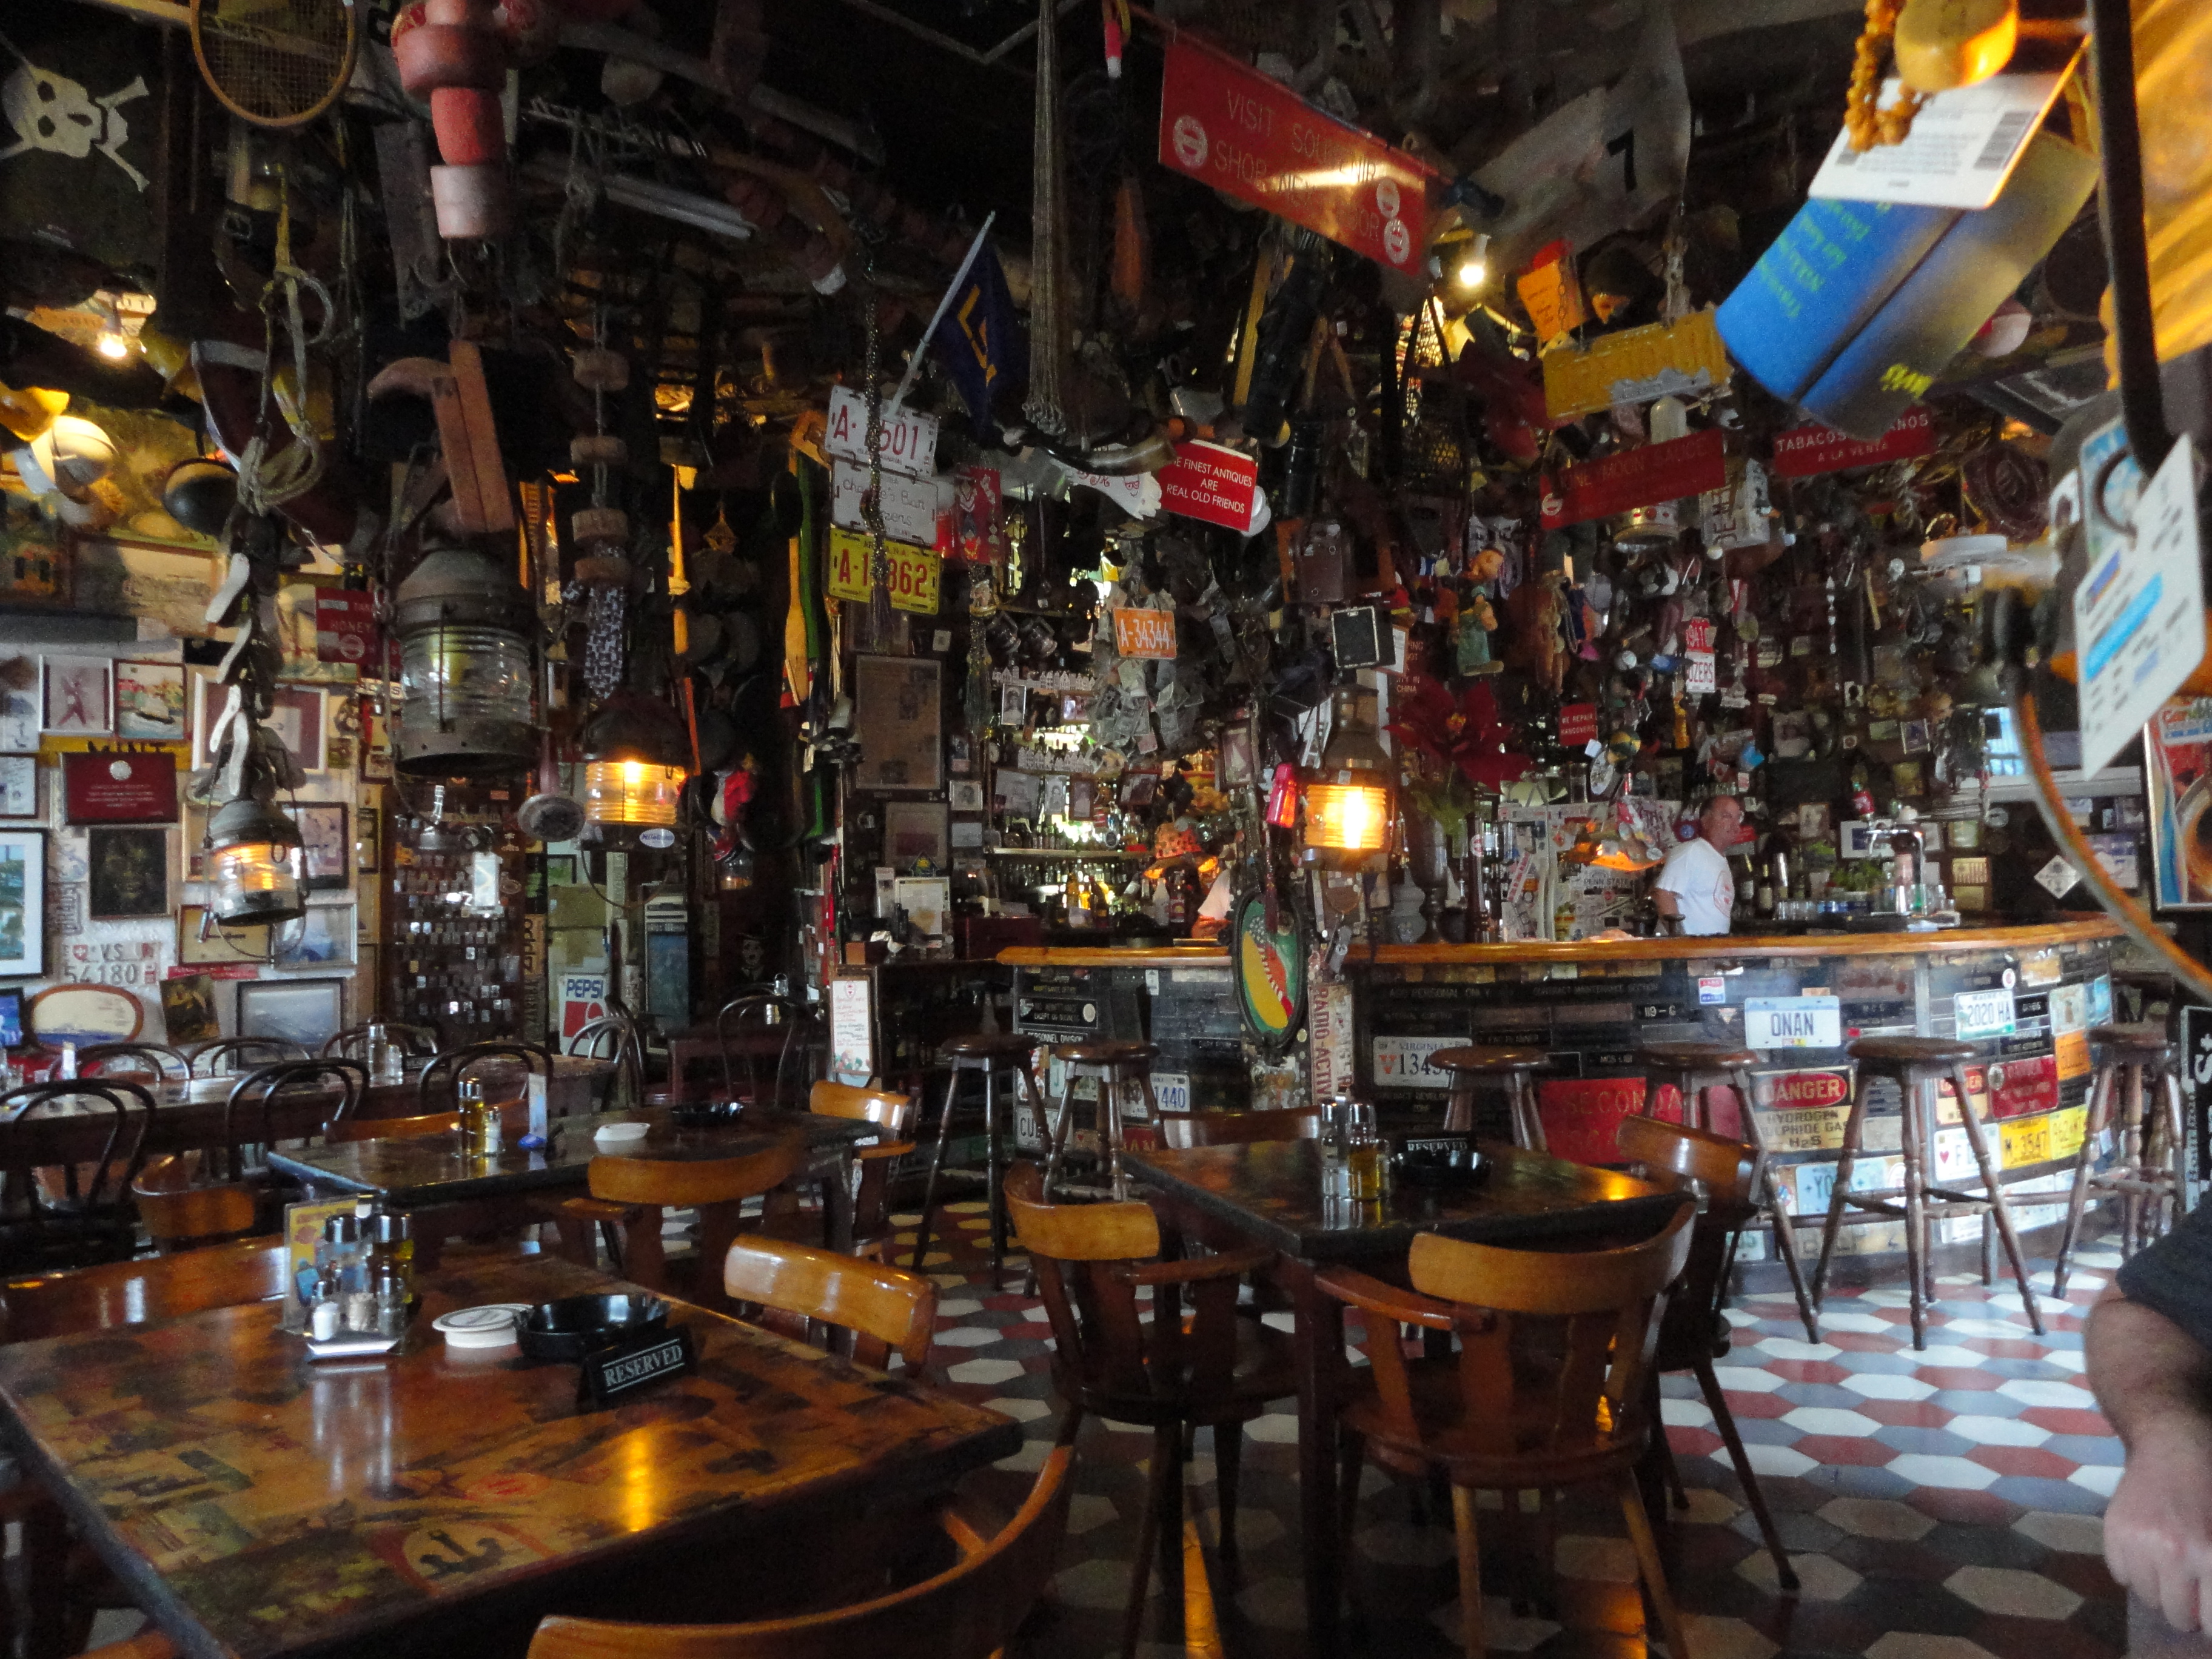 The famous Charlie's Bar in San Nicolas